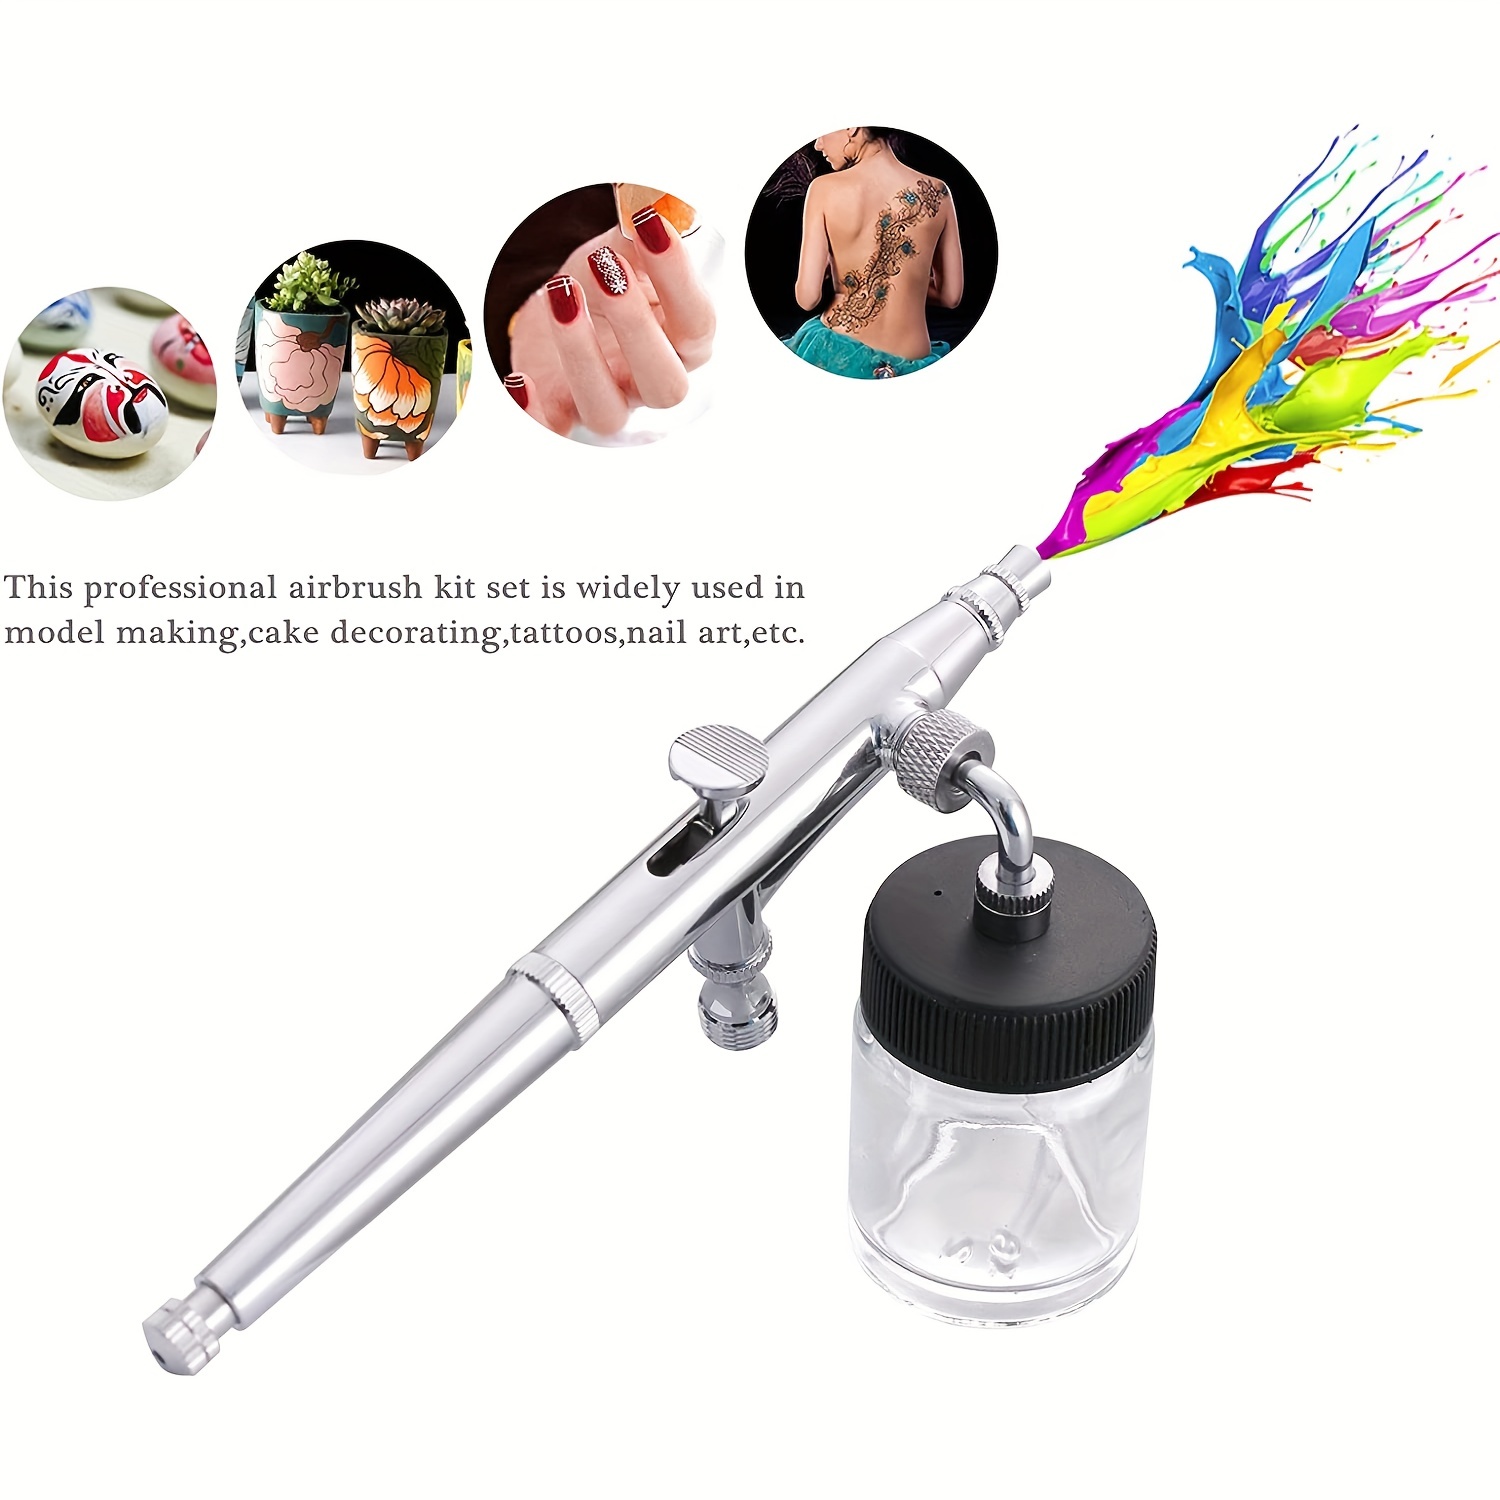 Mini Airbrush Kit, Dual-action Air Brush Pen Gravity Feed Airbrush for  Makeup Art Craft Nails Cake Decorating Modeling Tool With Airbrush -   Israel